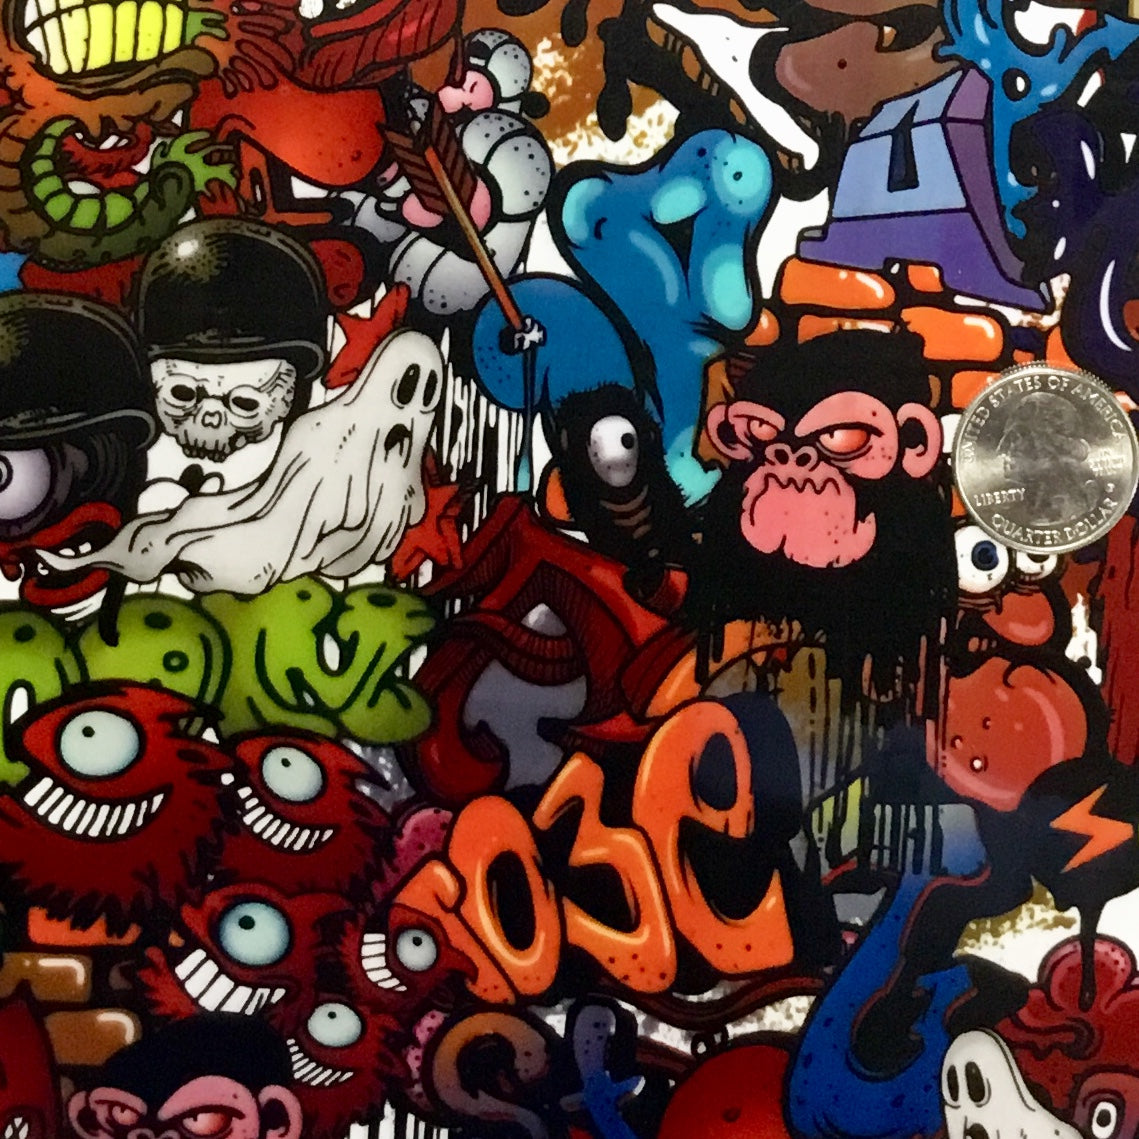 red bull sticker bomb, cluttered, sticker, highly, Stable Diffusion